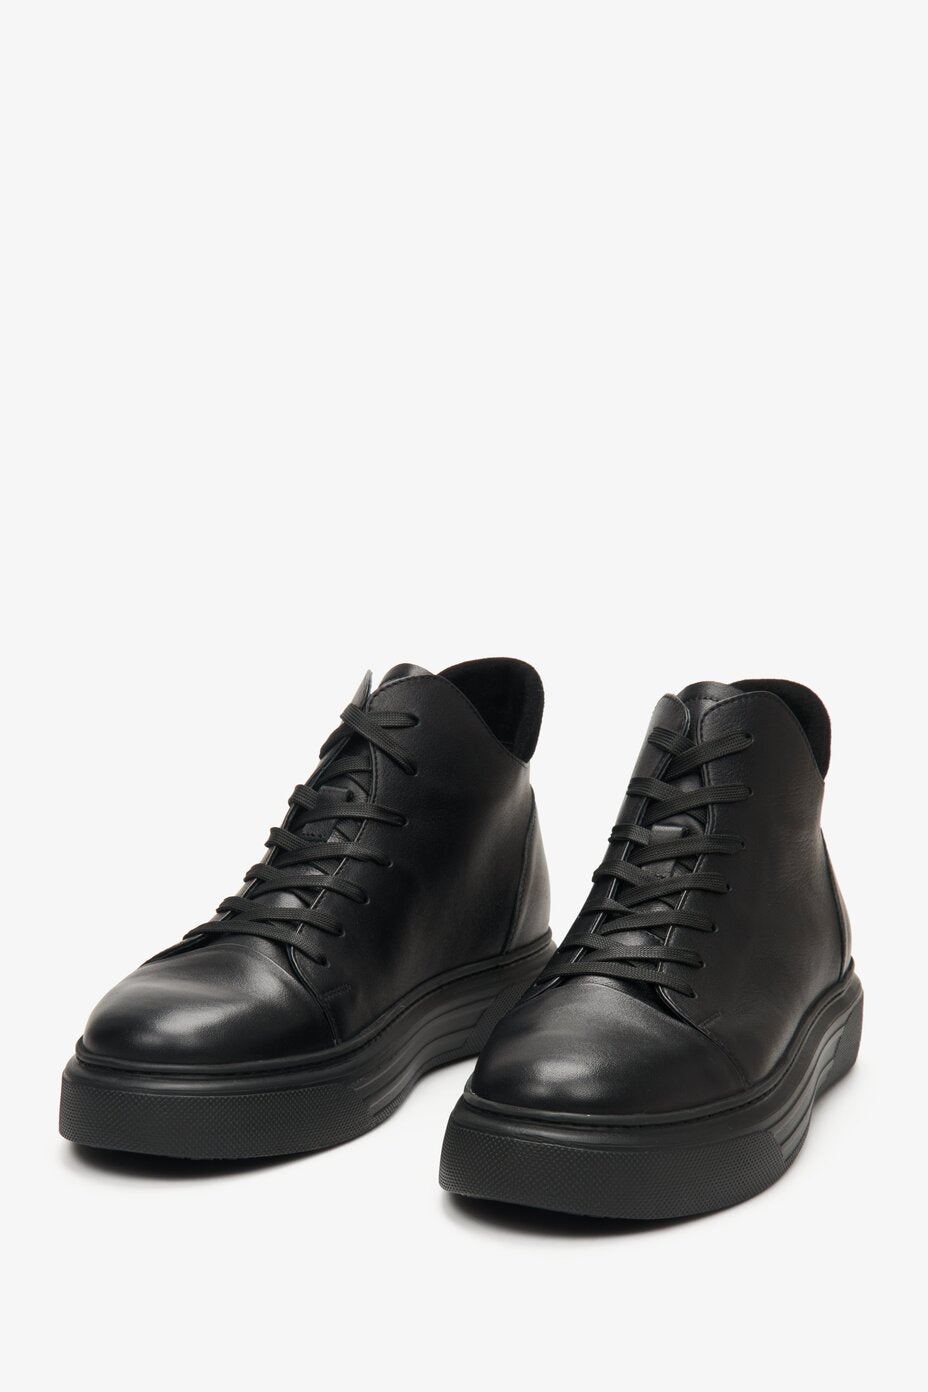 Men's high-top sneakers in black with laces by Estro.